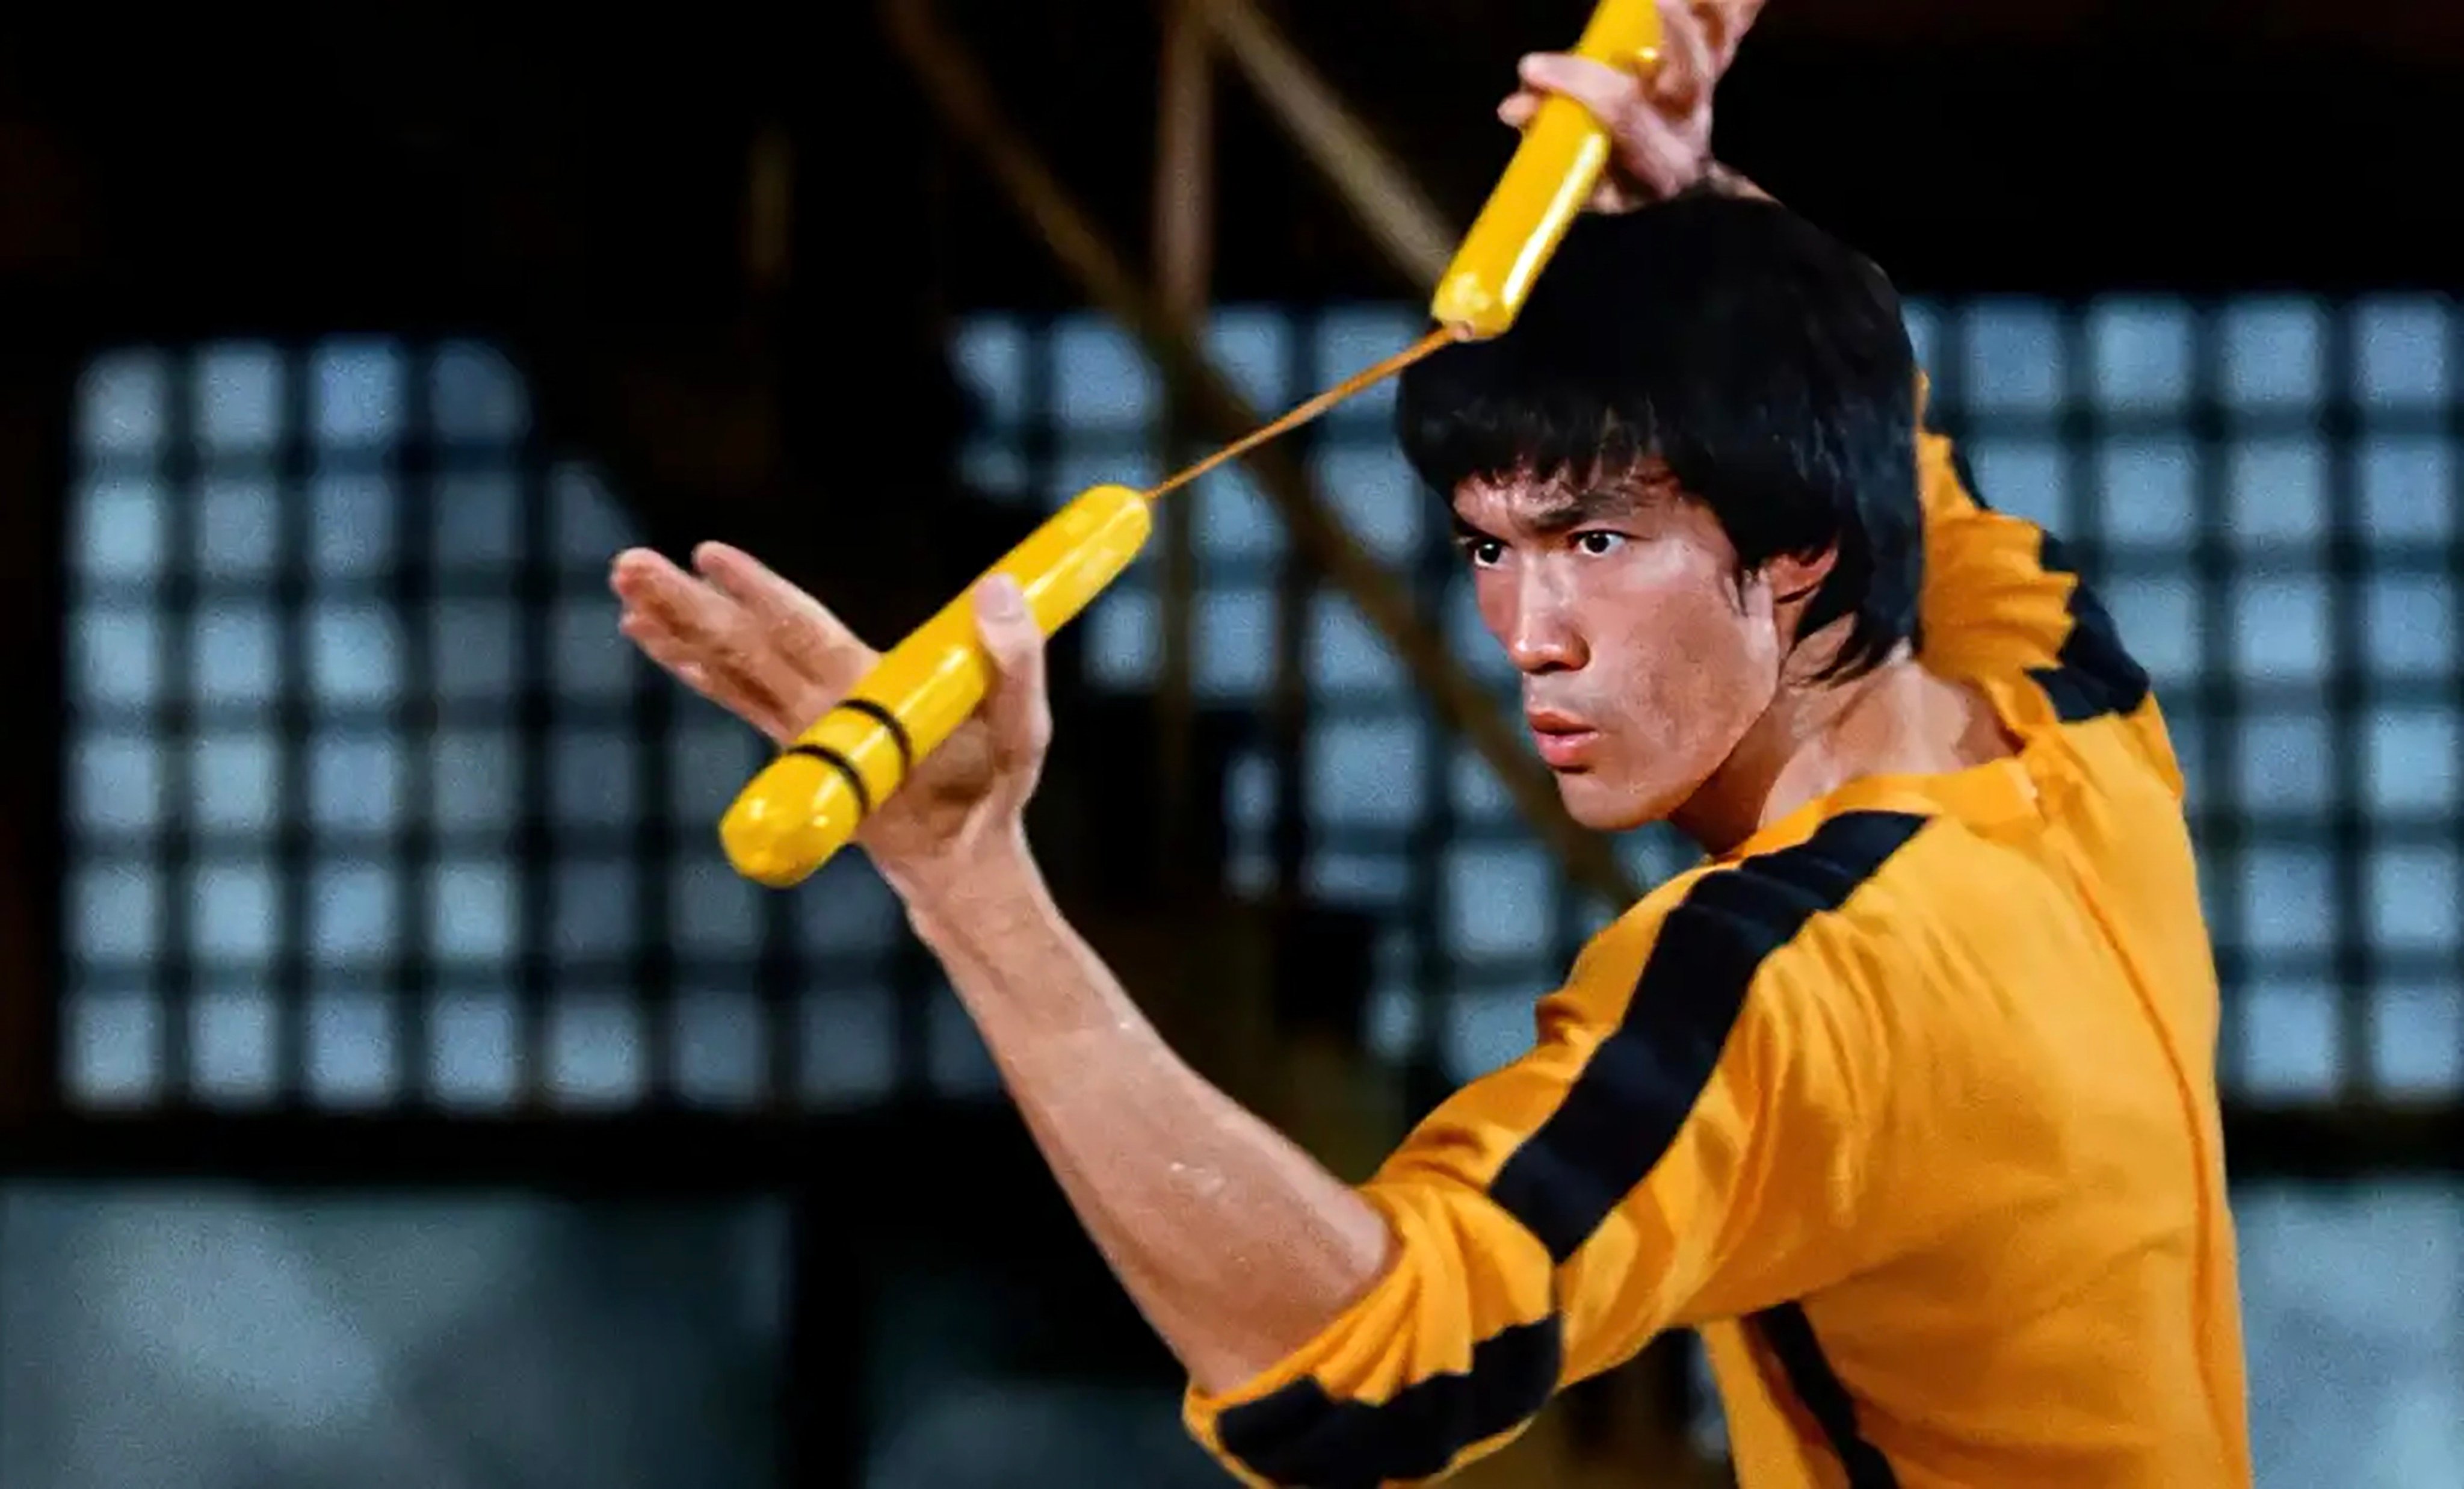 Bruce Lee in a still from Enter the Dragon. This and other Hong Kong films made Lee’s brand of kung fu globally popular, but it is just one among many forms of martial arts. Classes in many different martial arts are available at studios in Hong Kong. Photo: Golden Harvest